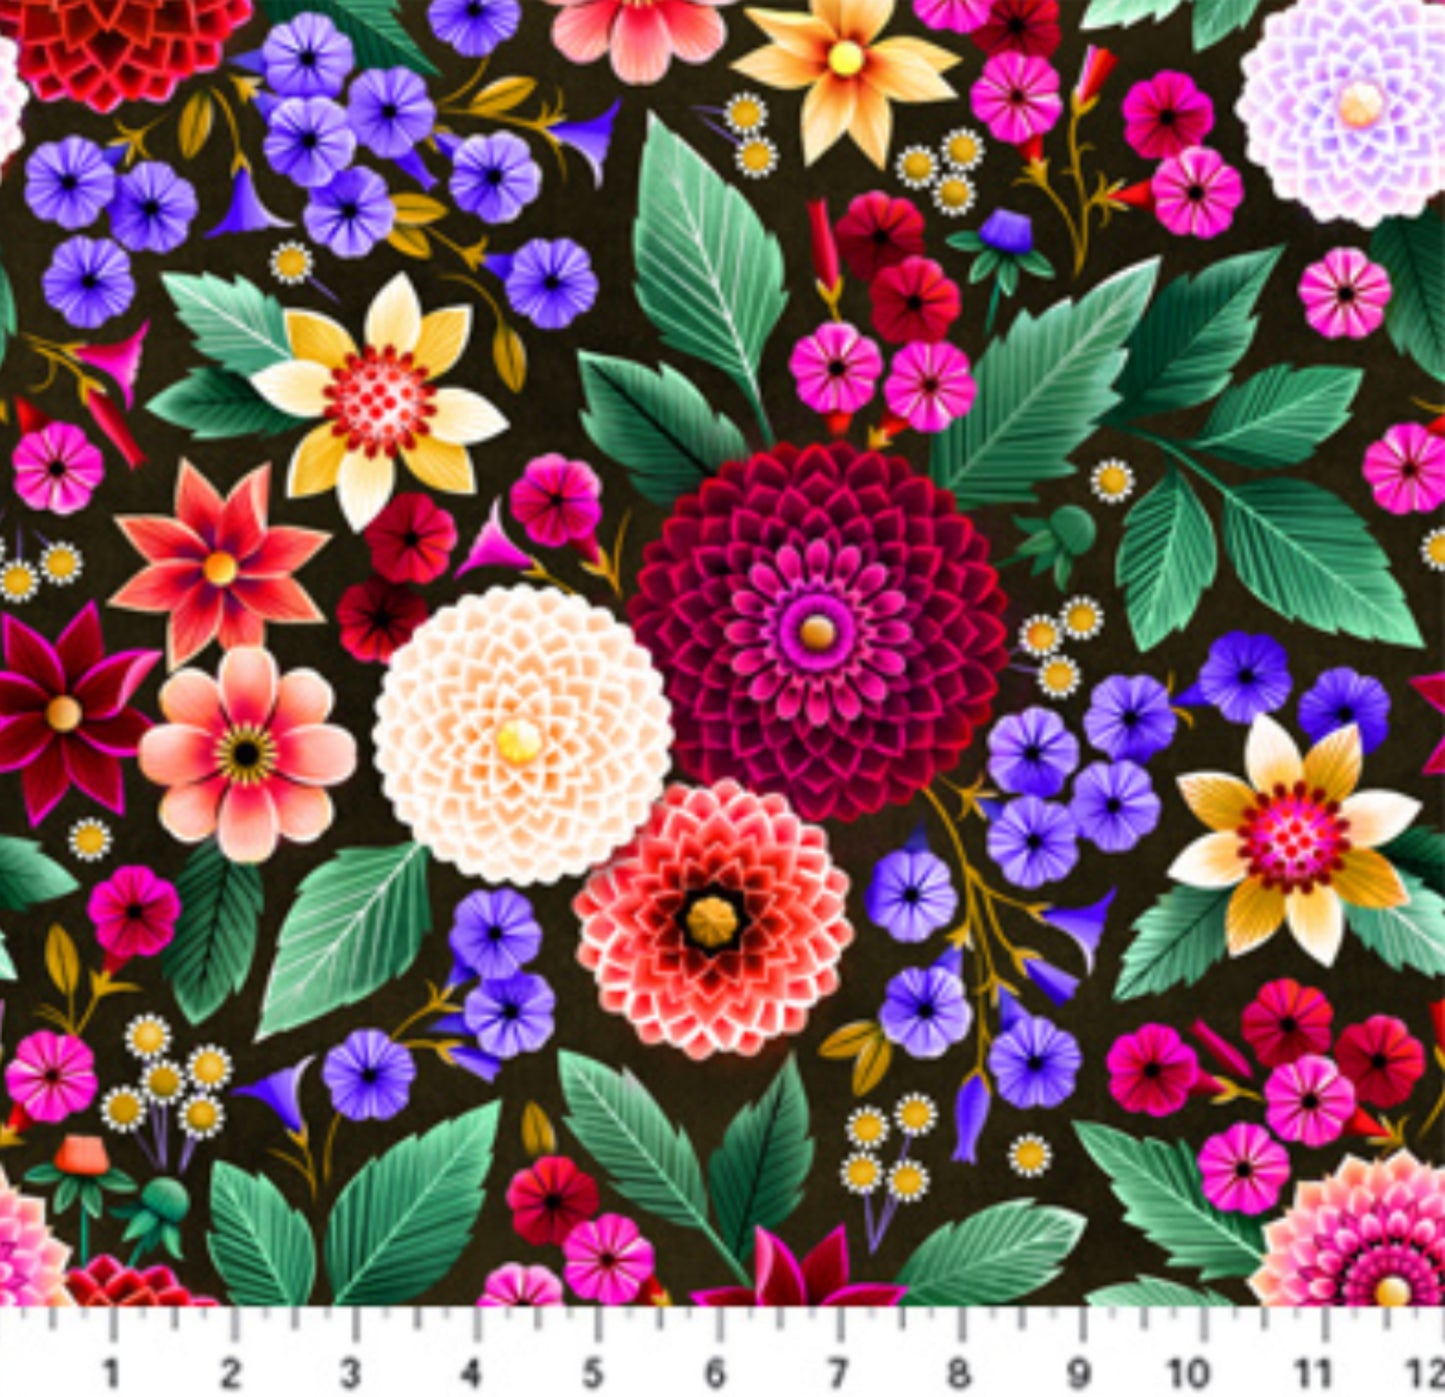 Garden from the June Collection by Figo Fabrics